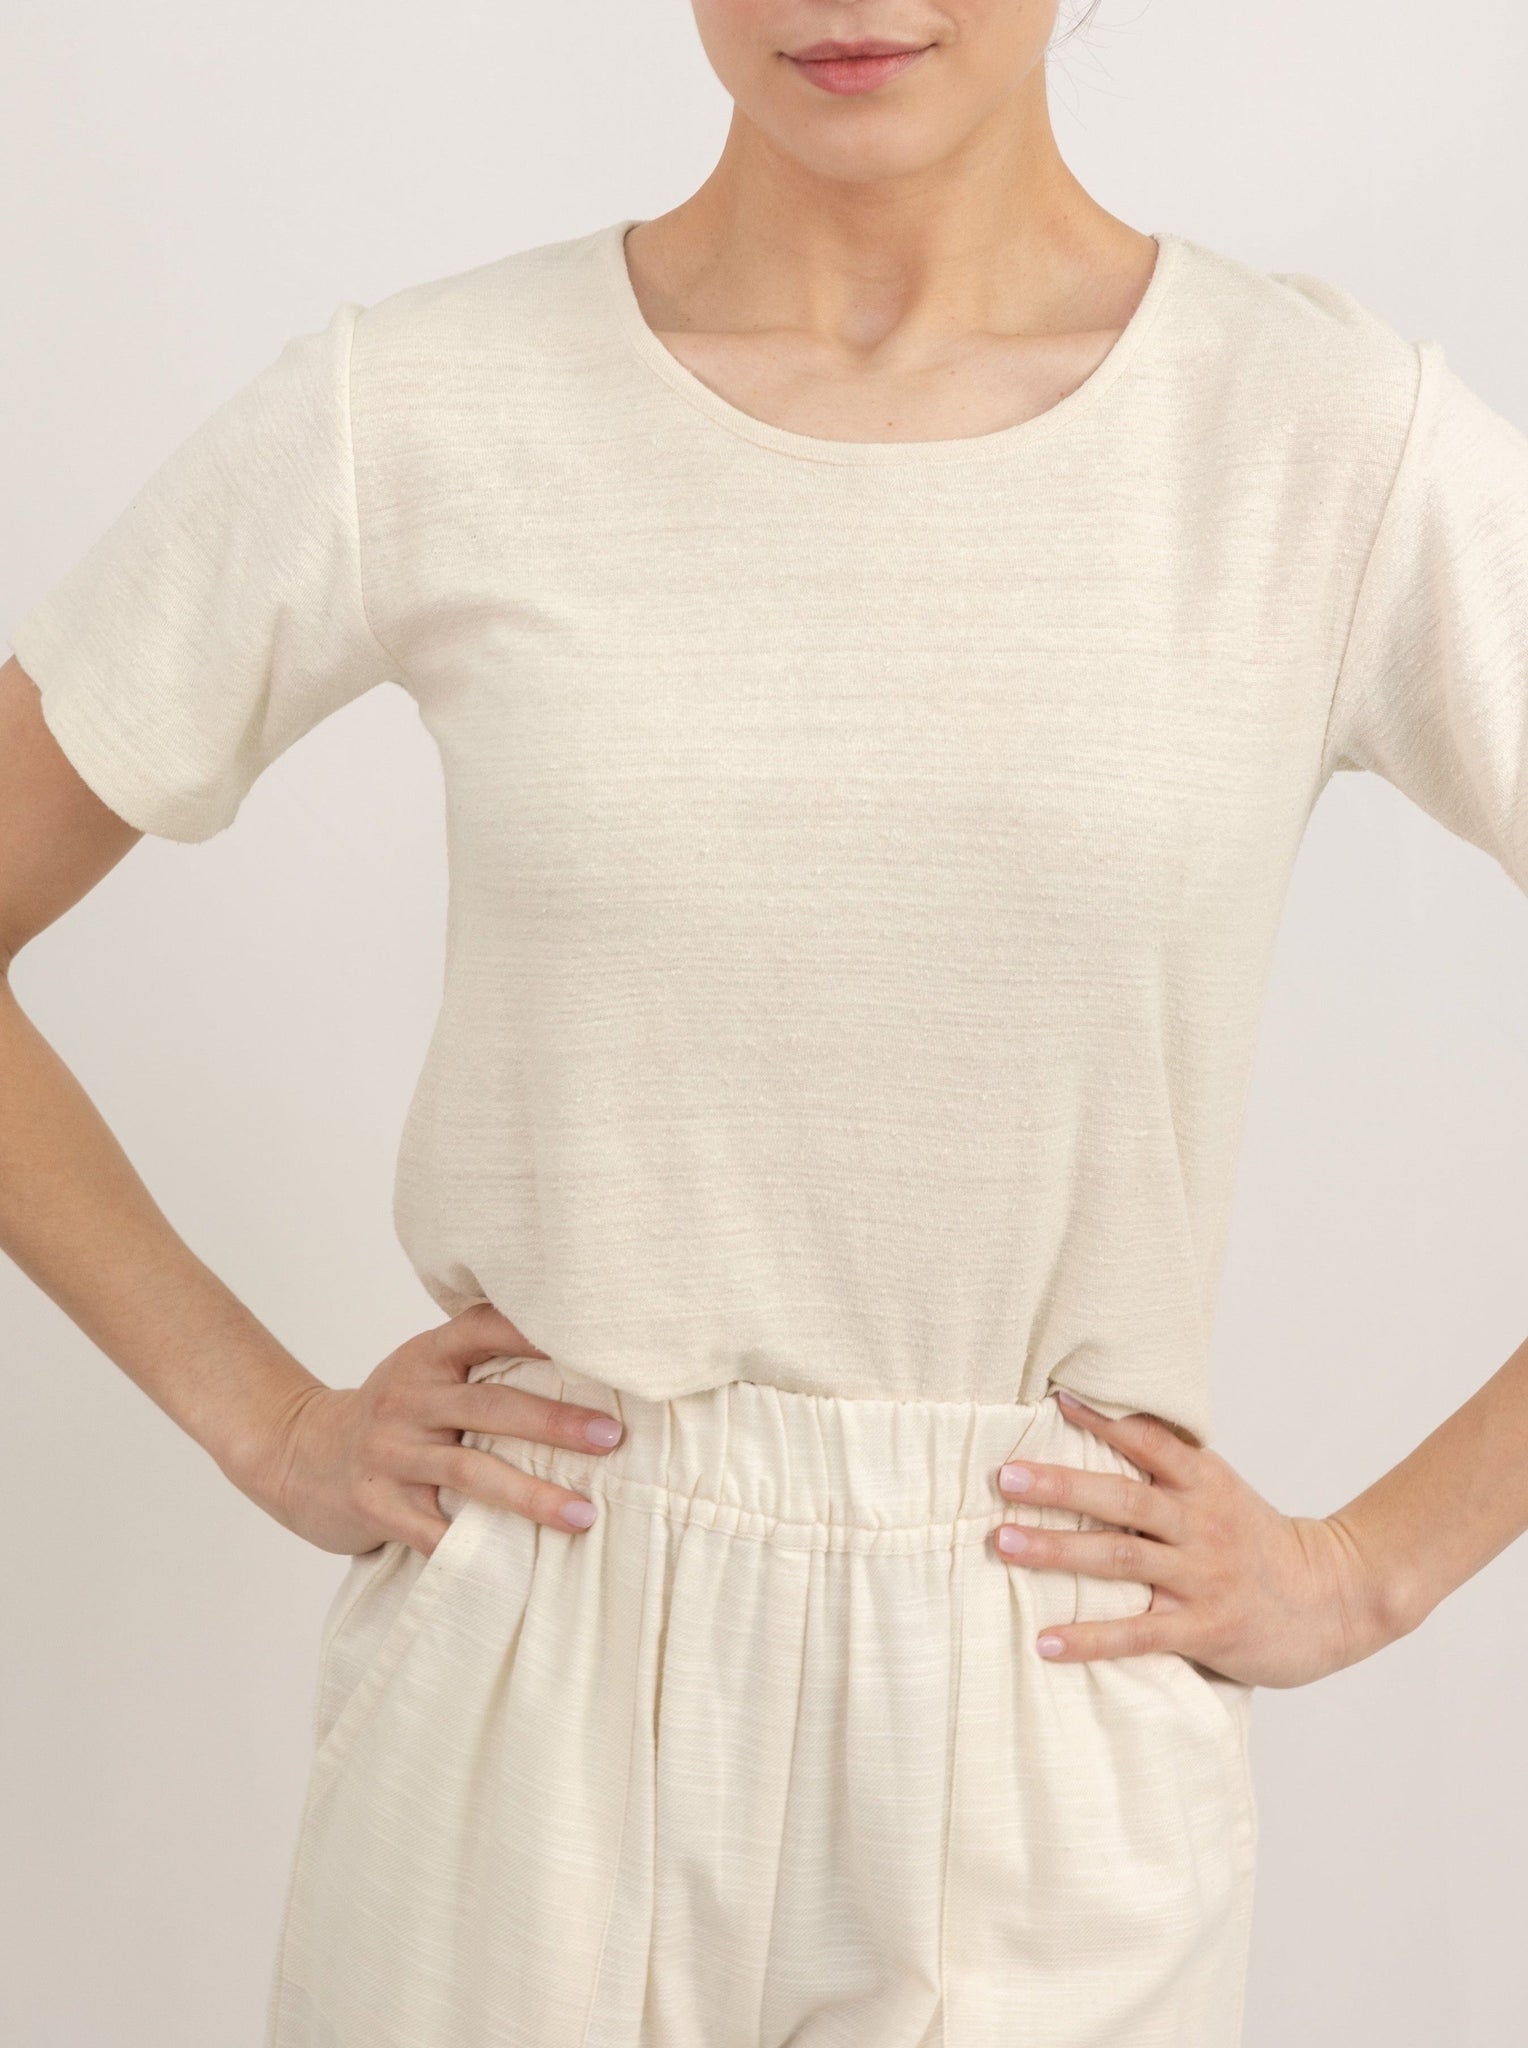 A woman with her hands on her hips, wearing a Cropped Crew T-Shirt - Ivory Silk Noil.